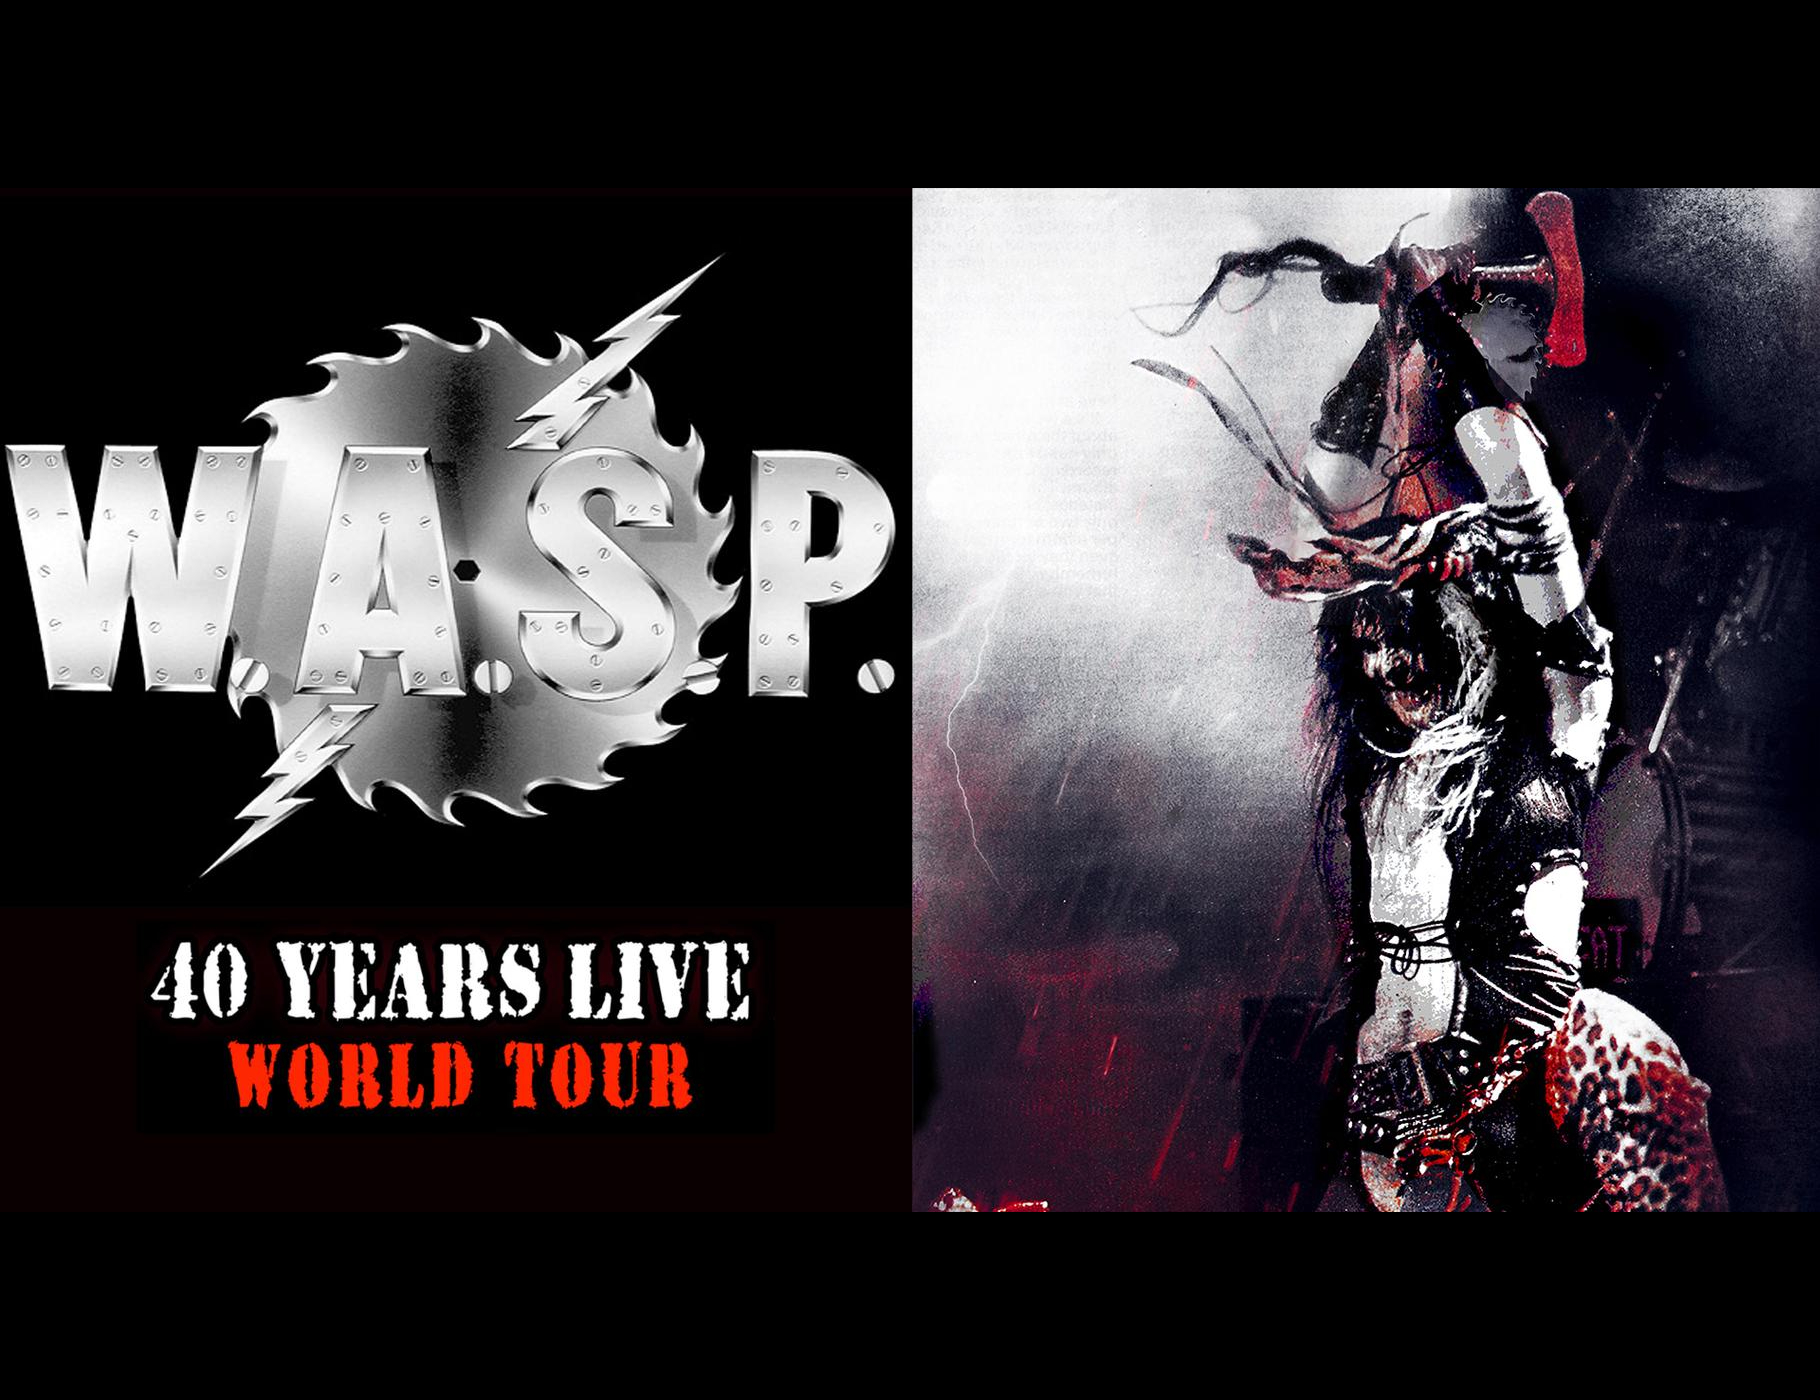 BLACKIE LAWLESS ON W.A.S.P.'S 40TH ANNIVERSARY WORLD TOUR "WE'RE